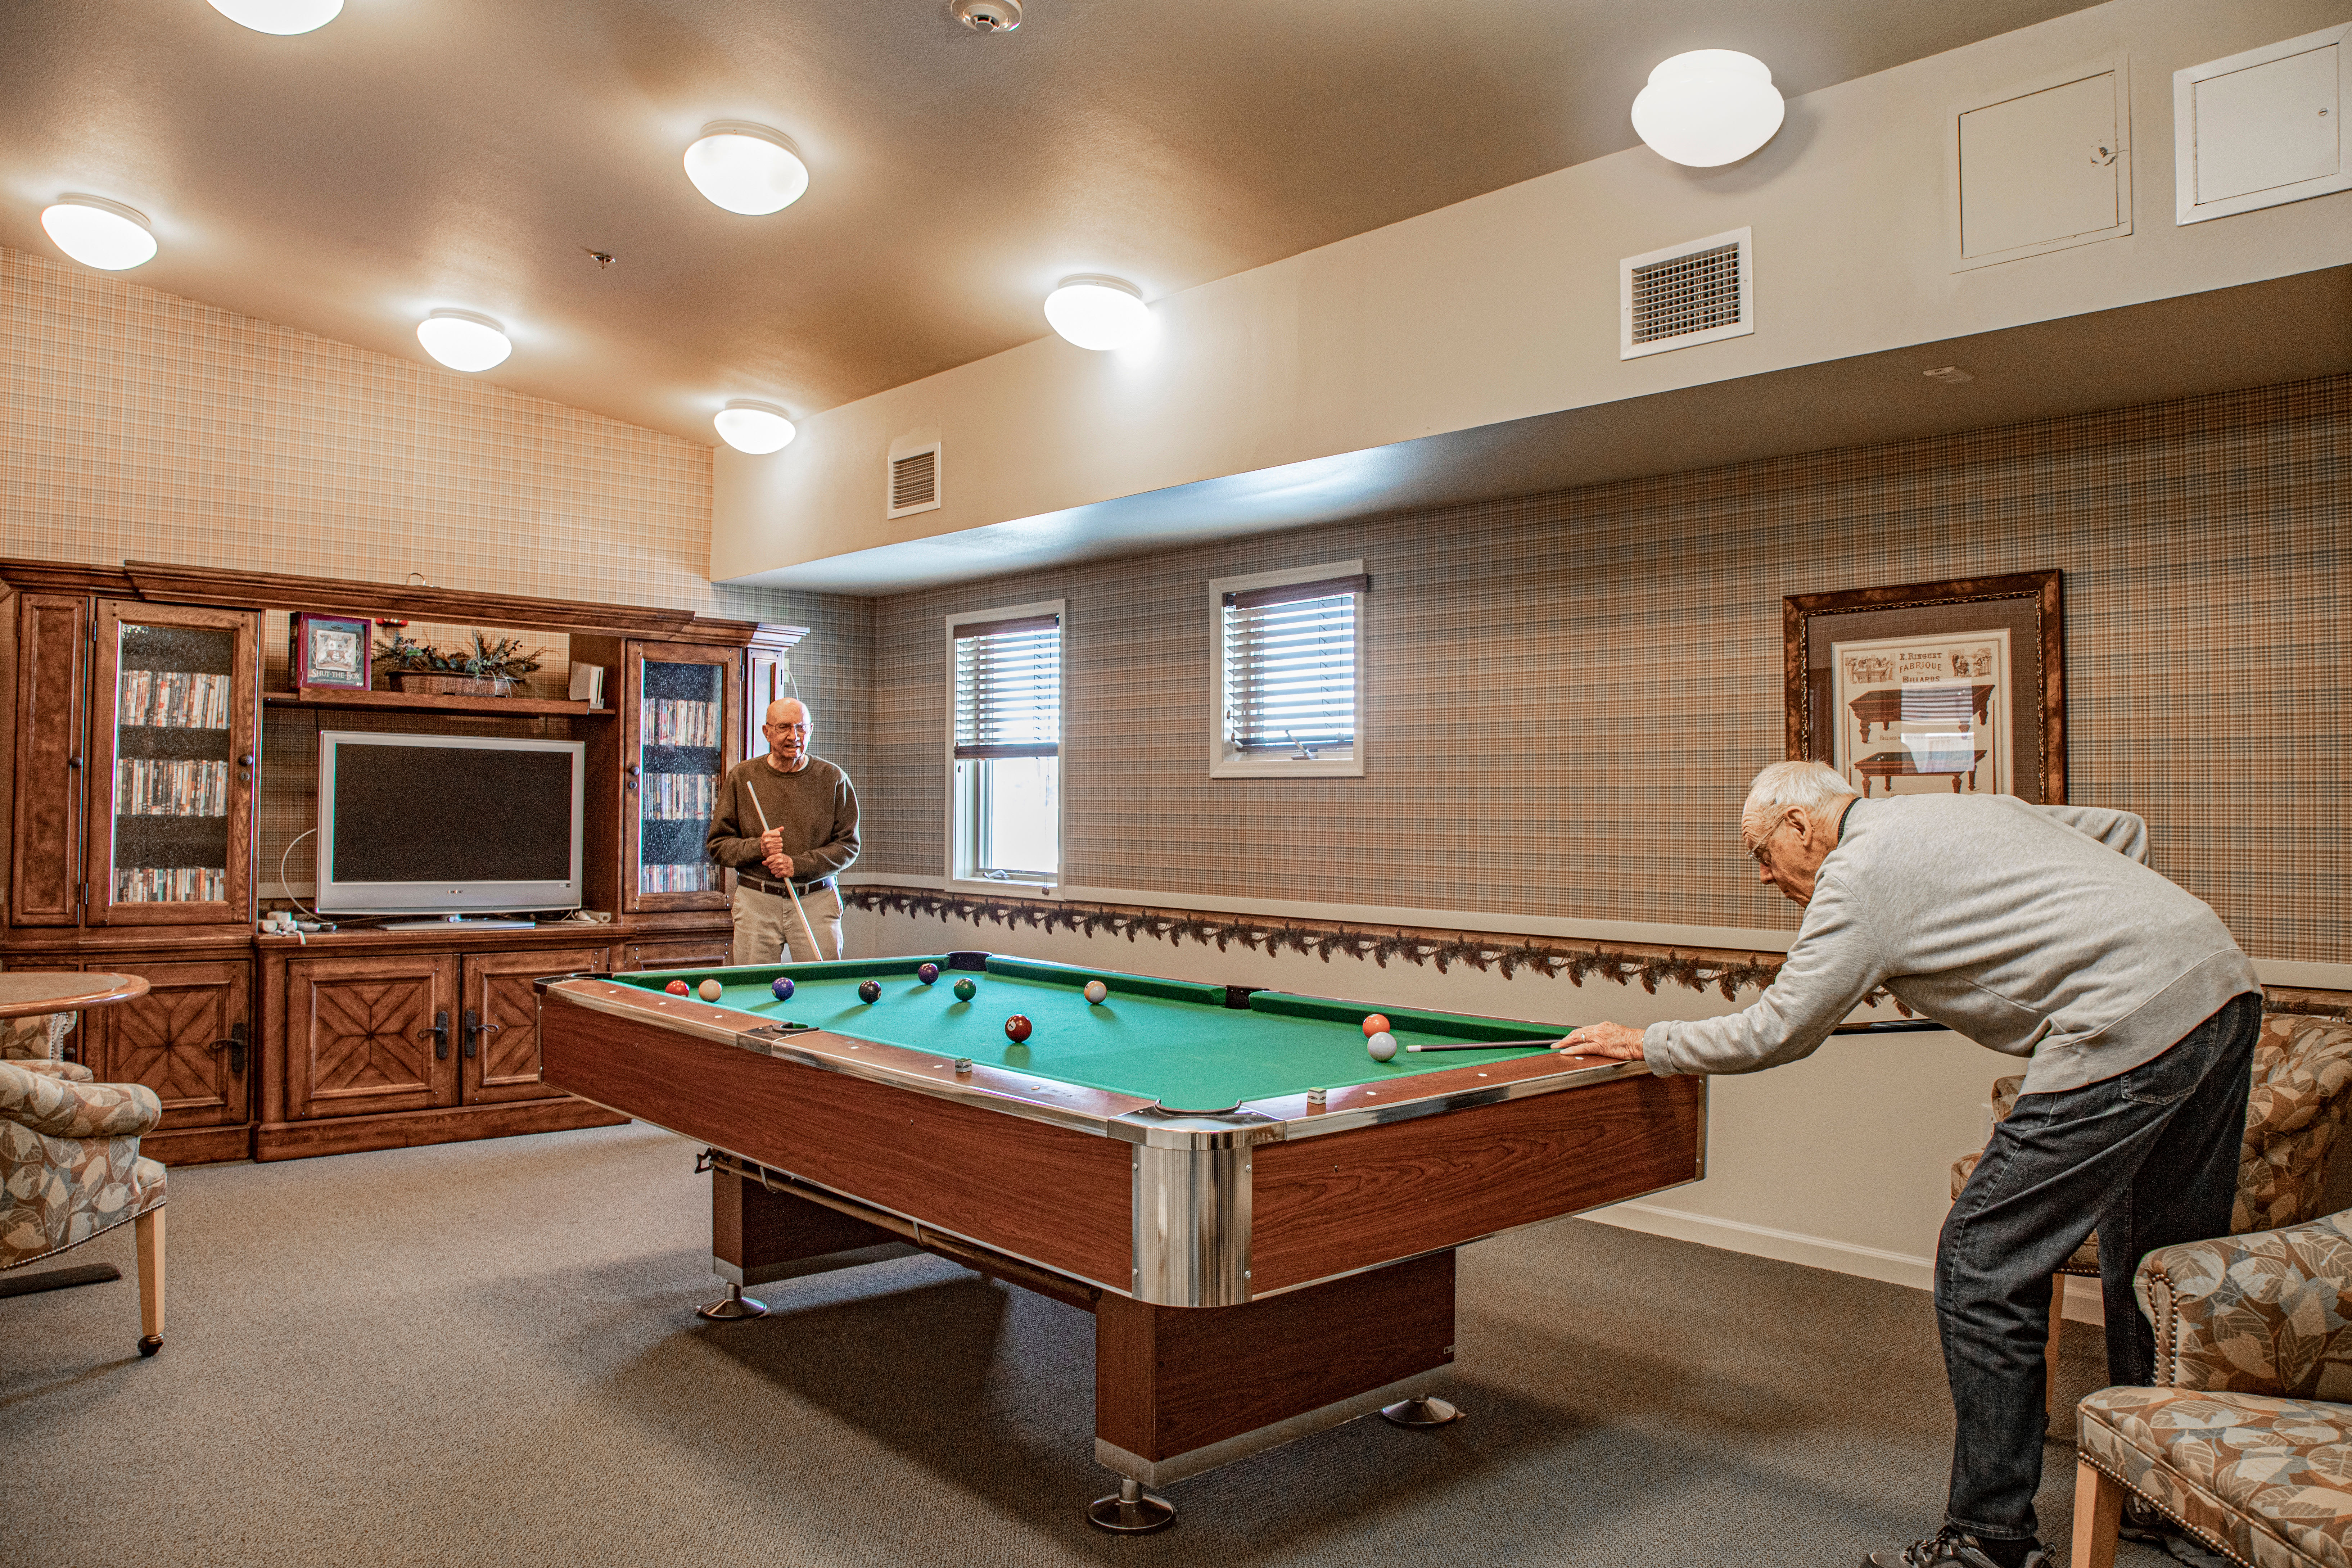 Game room complete with billiard table at Majestic Rim Retirement Living in Payson, Arizona. 